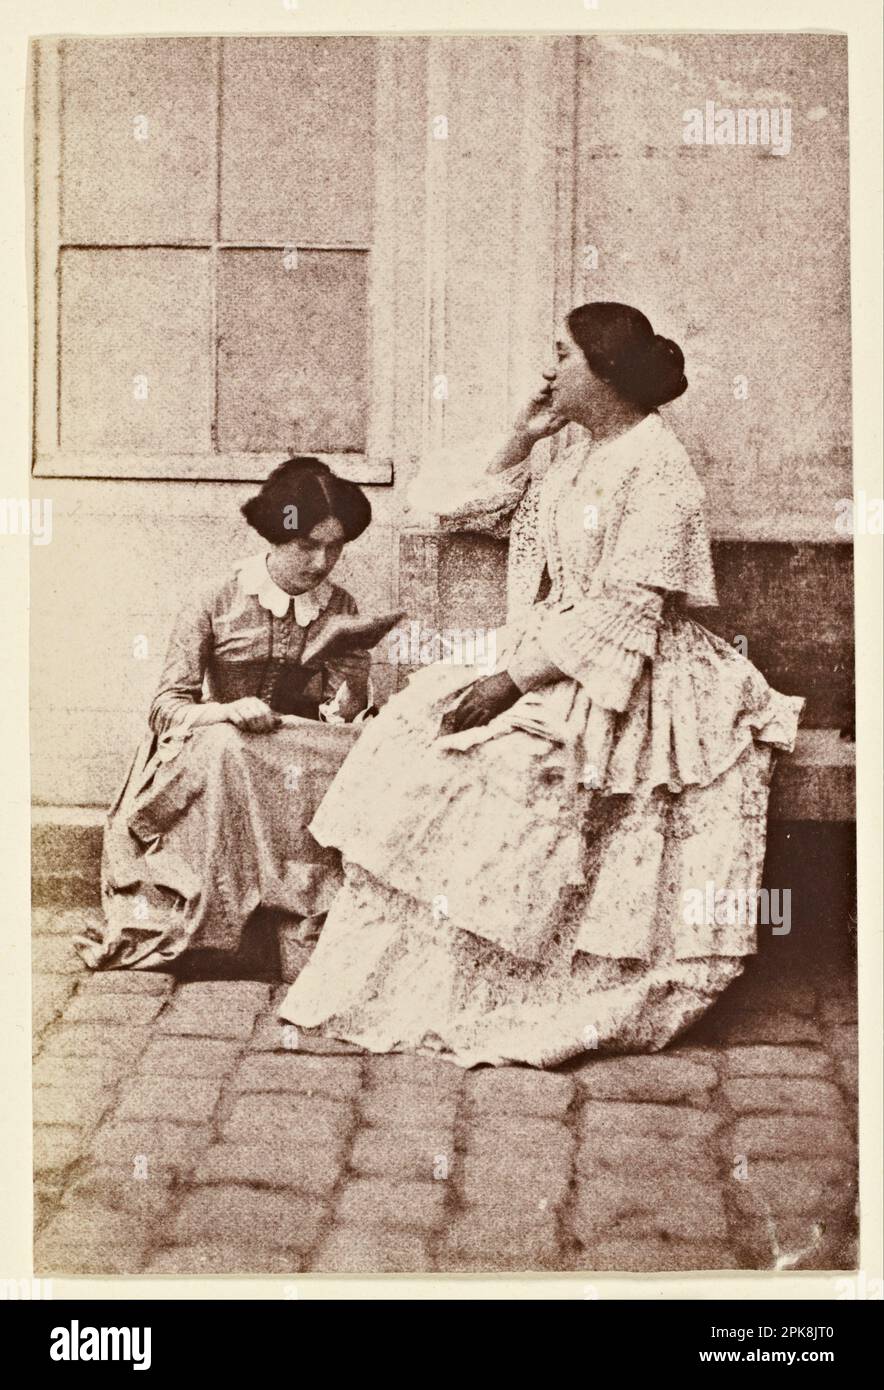 Women in a Courtyard 1847/1857 by Charles Negre Stock Photo